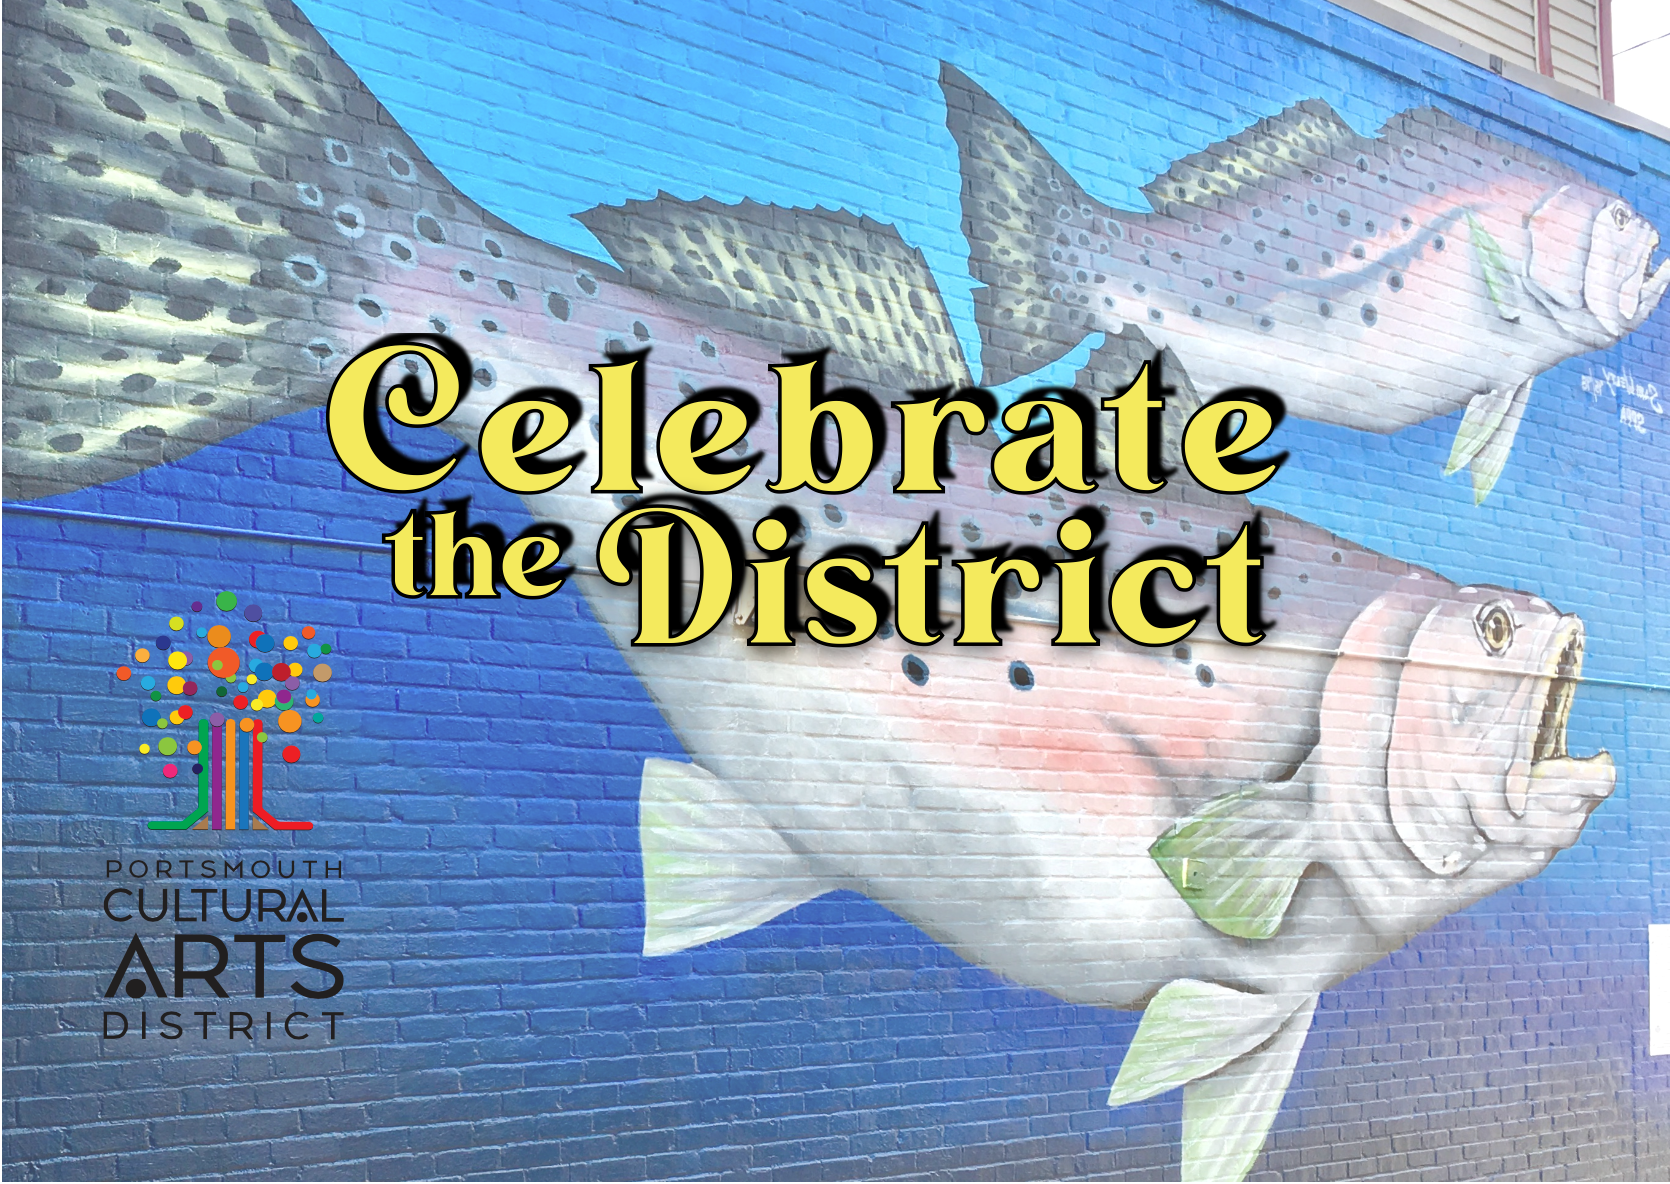 Celebrate teh District event poster